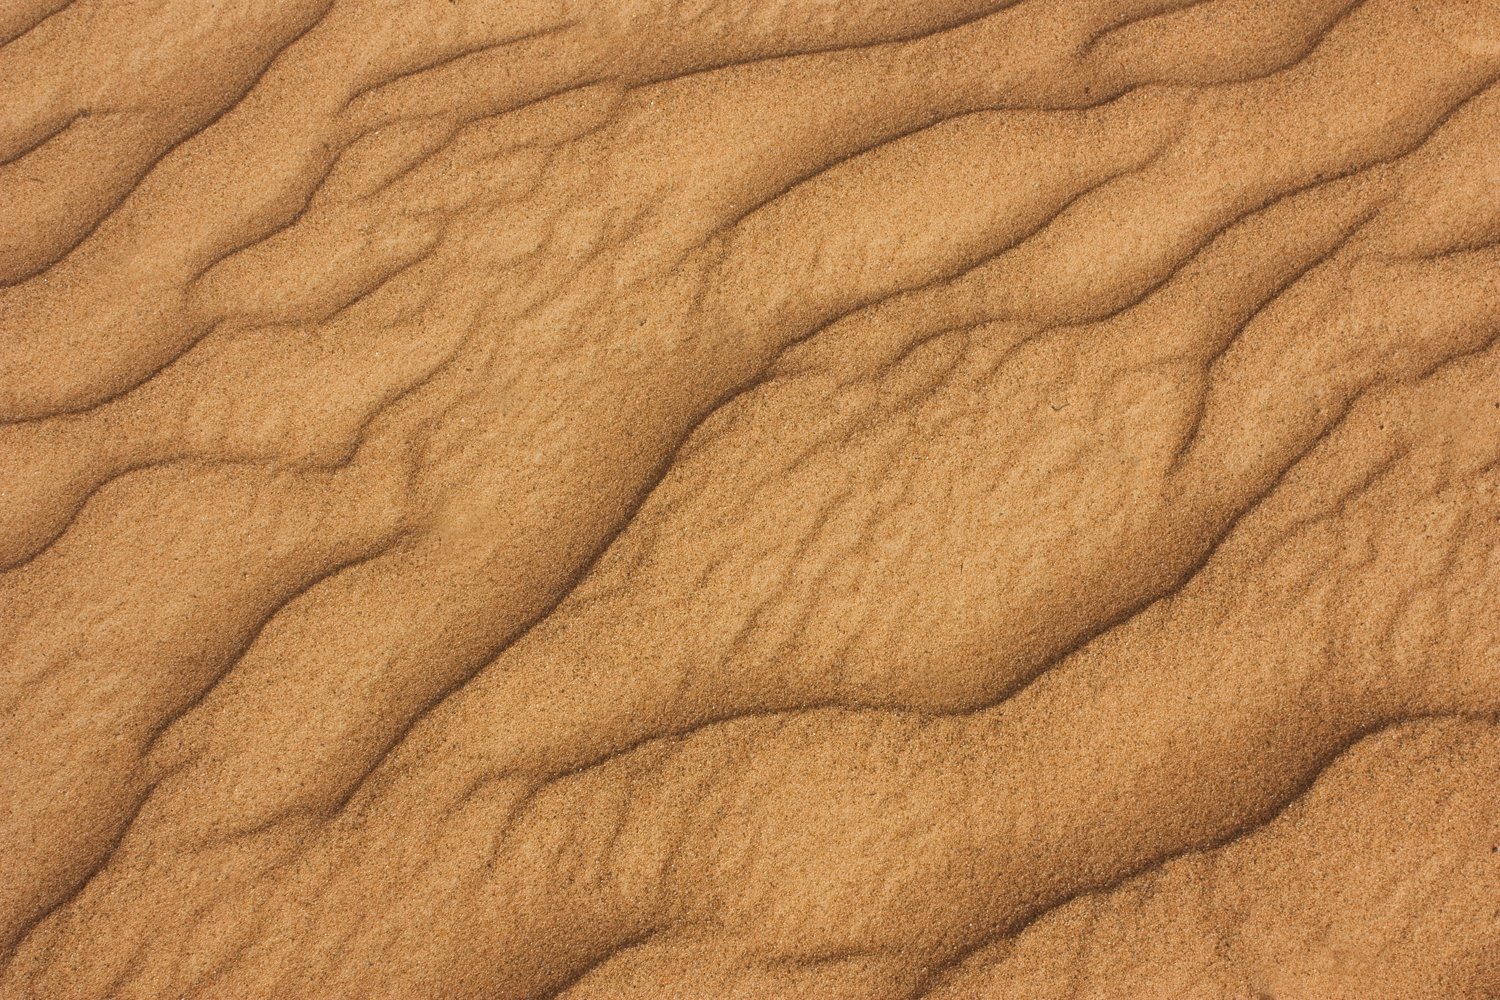 a very wavy pattern of sand or dirt on the beach